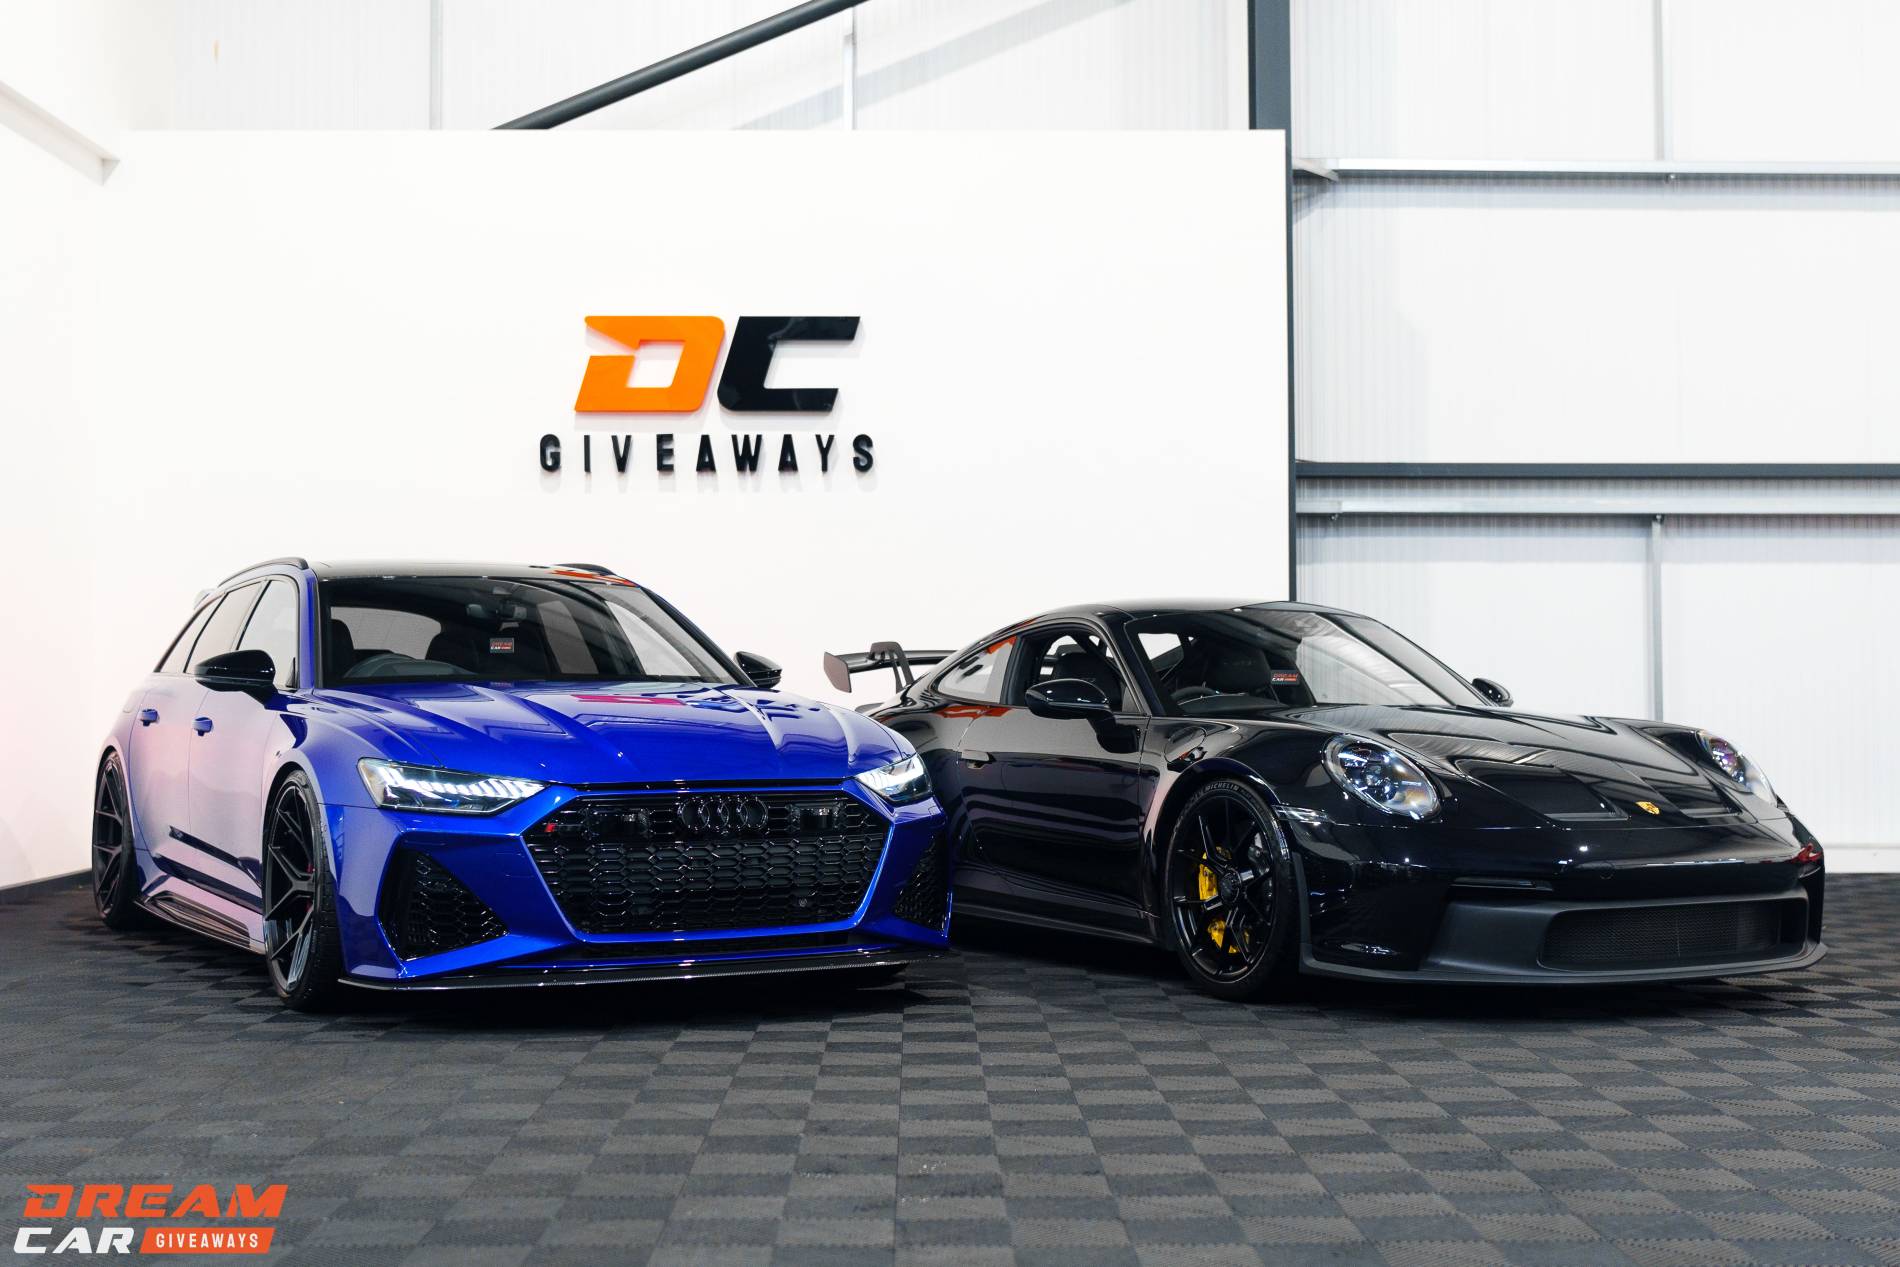 Win this 992 GT3 & Audi RS6 & £5,000 or £220,000 Tax Free